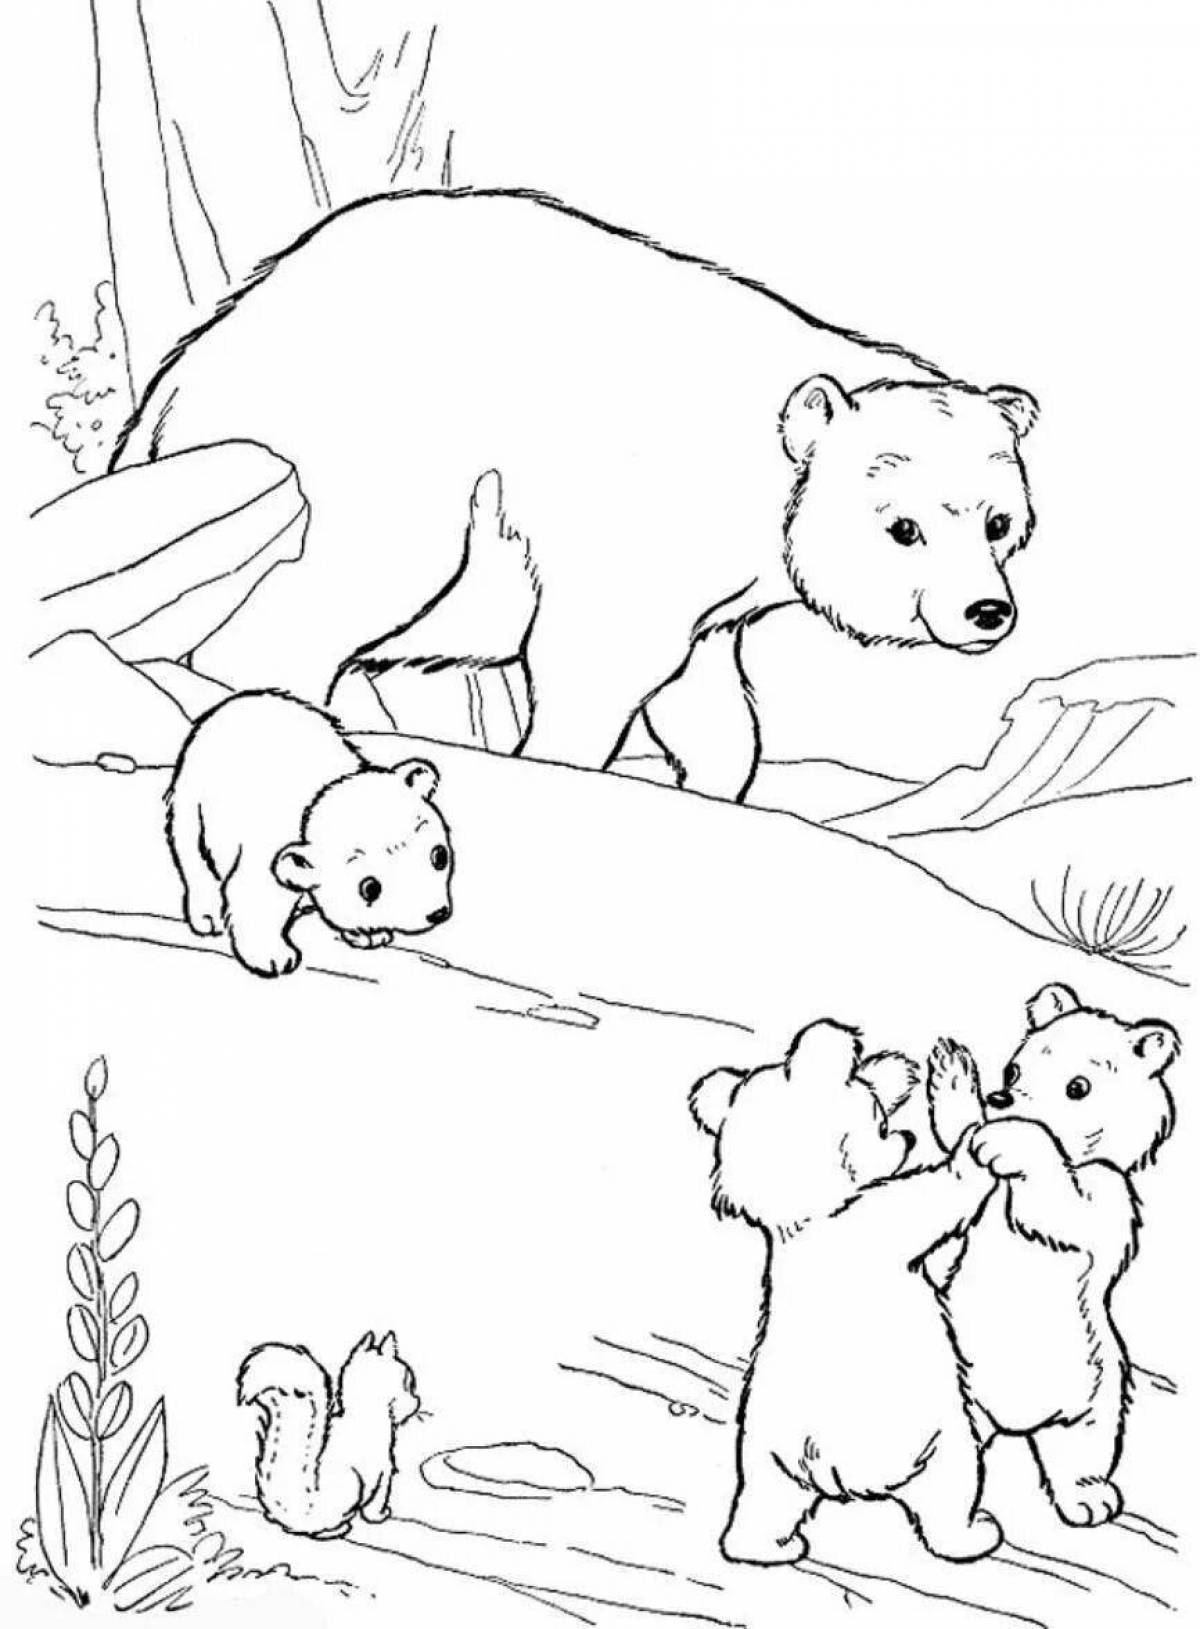 Drawing of a sweet bear for children